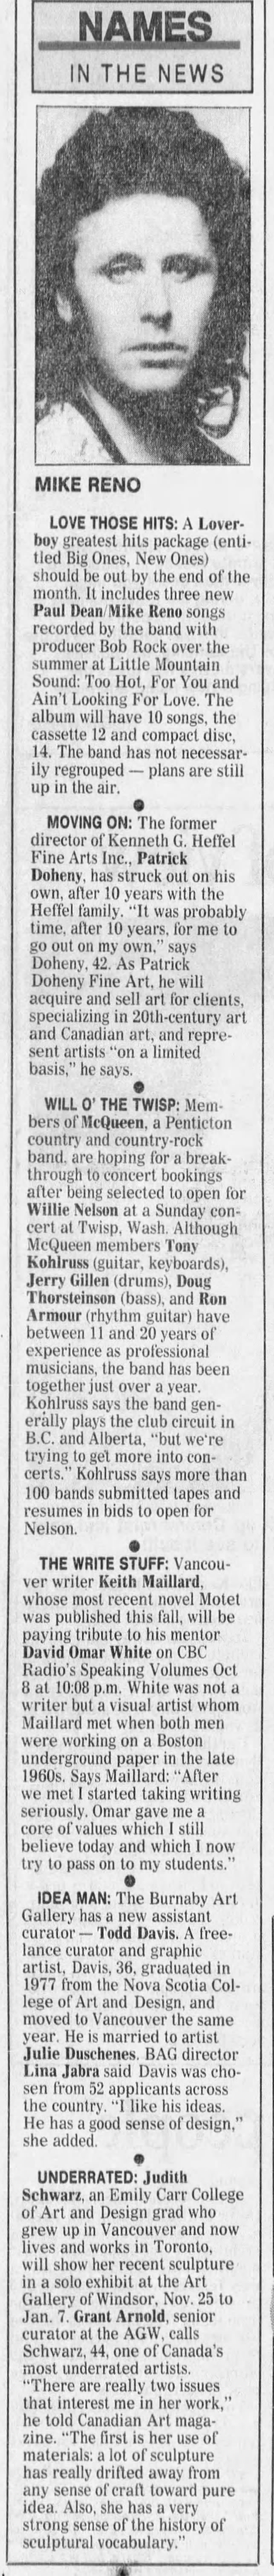 The Vancouver Sun Sep 1989